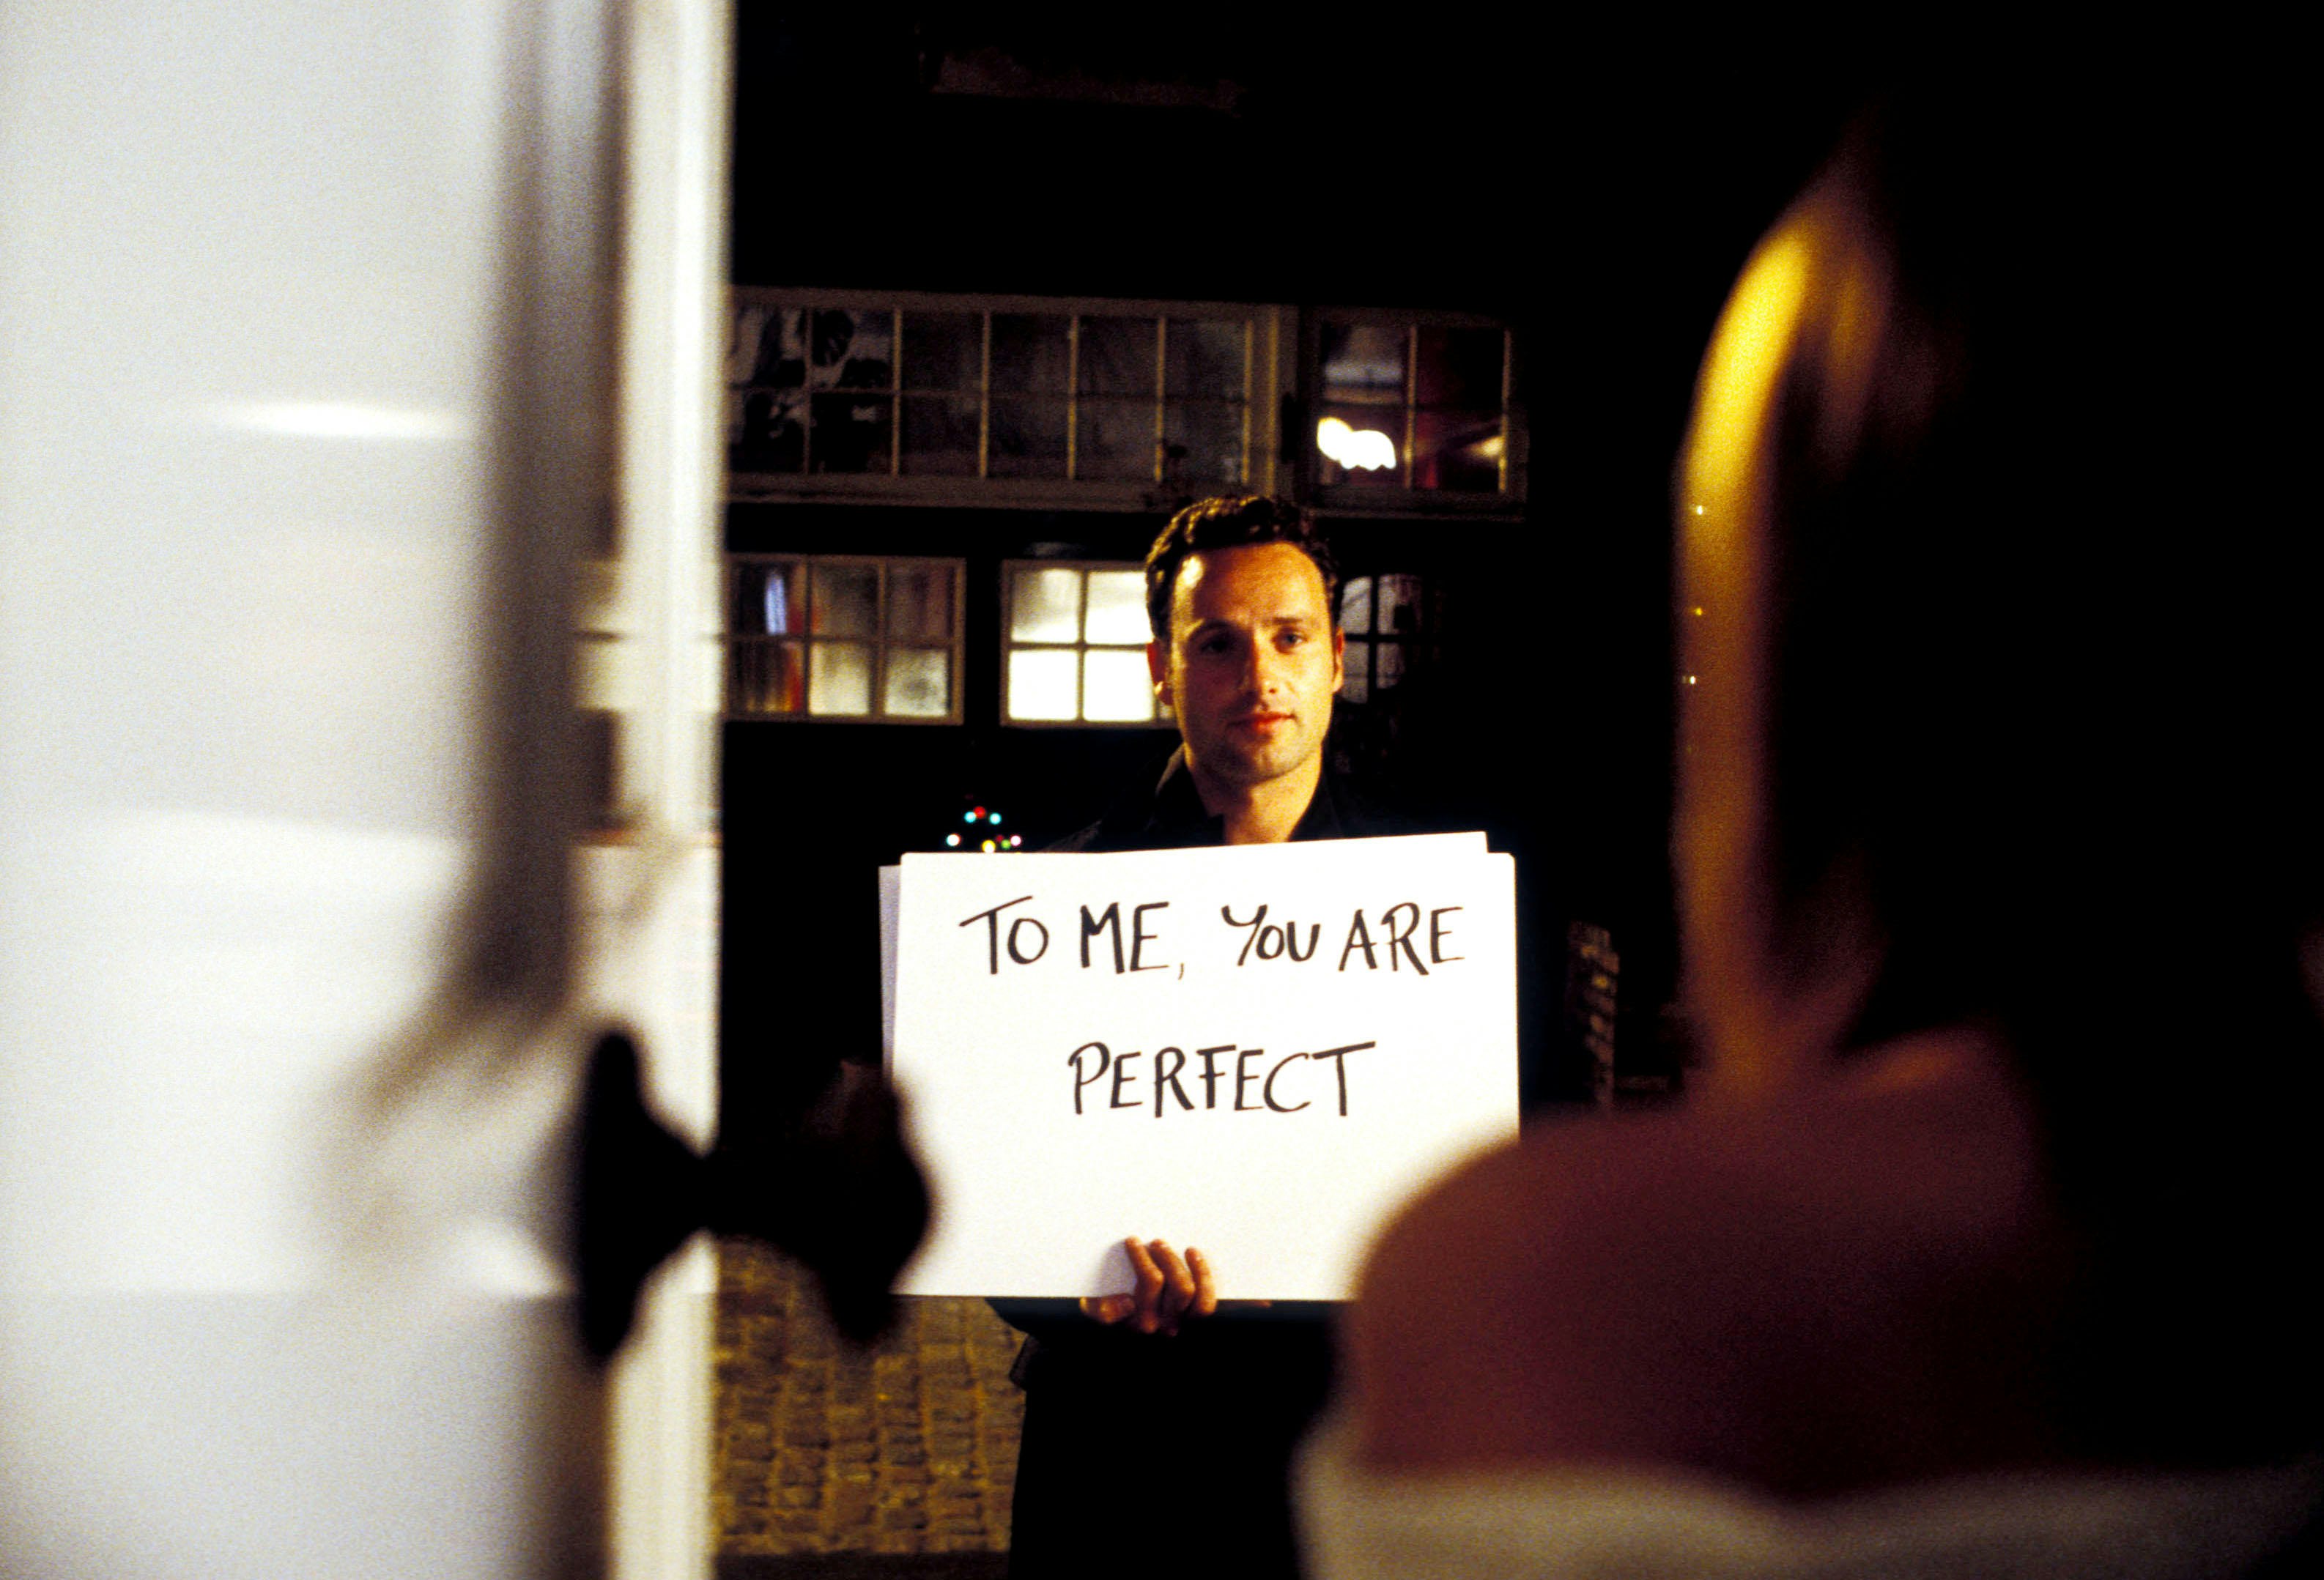 Actor Andrew Lincoln holds a sign that says 'to me you are perfect' in an iconic scene from Love Actually